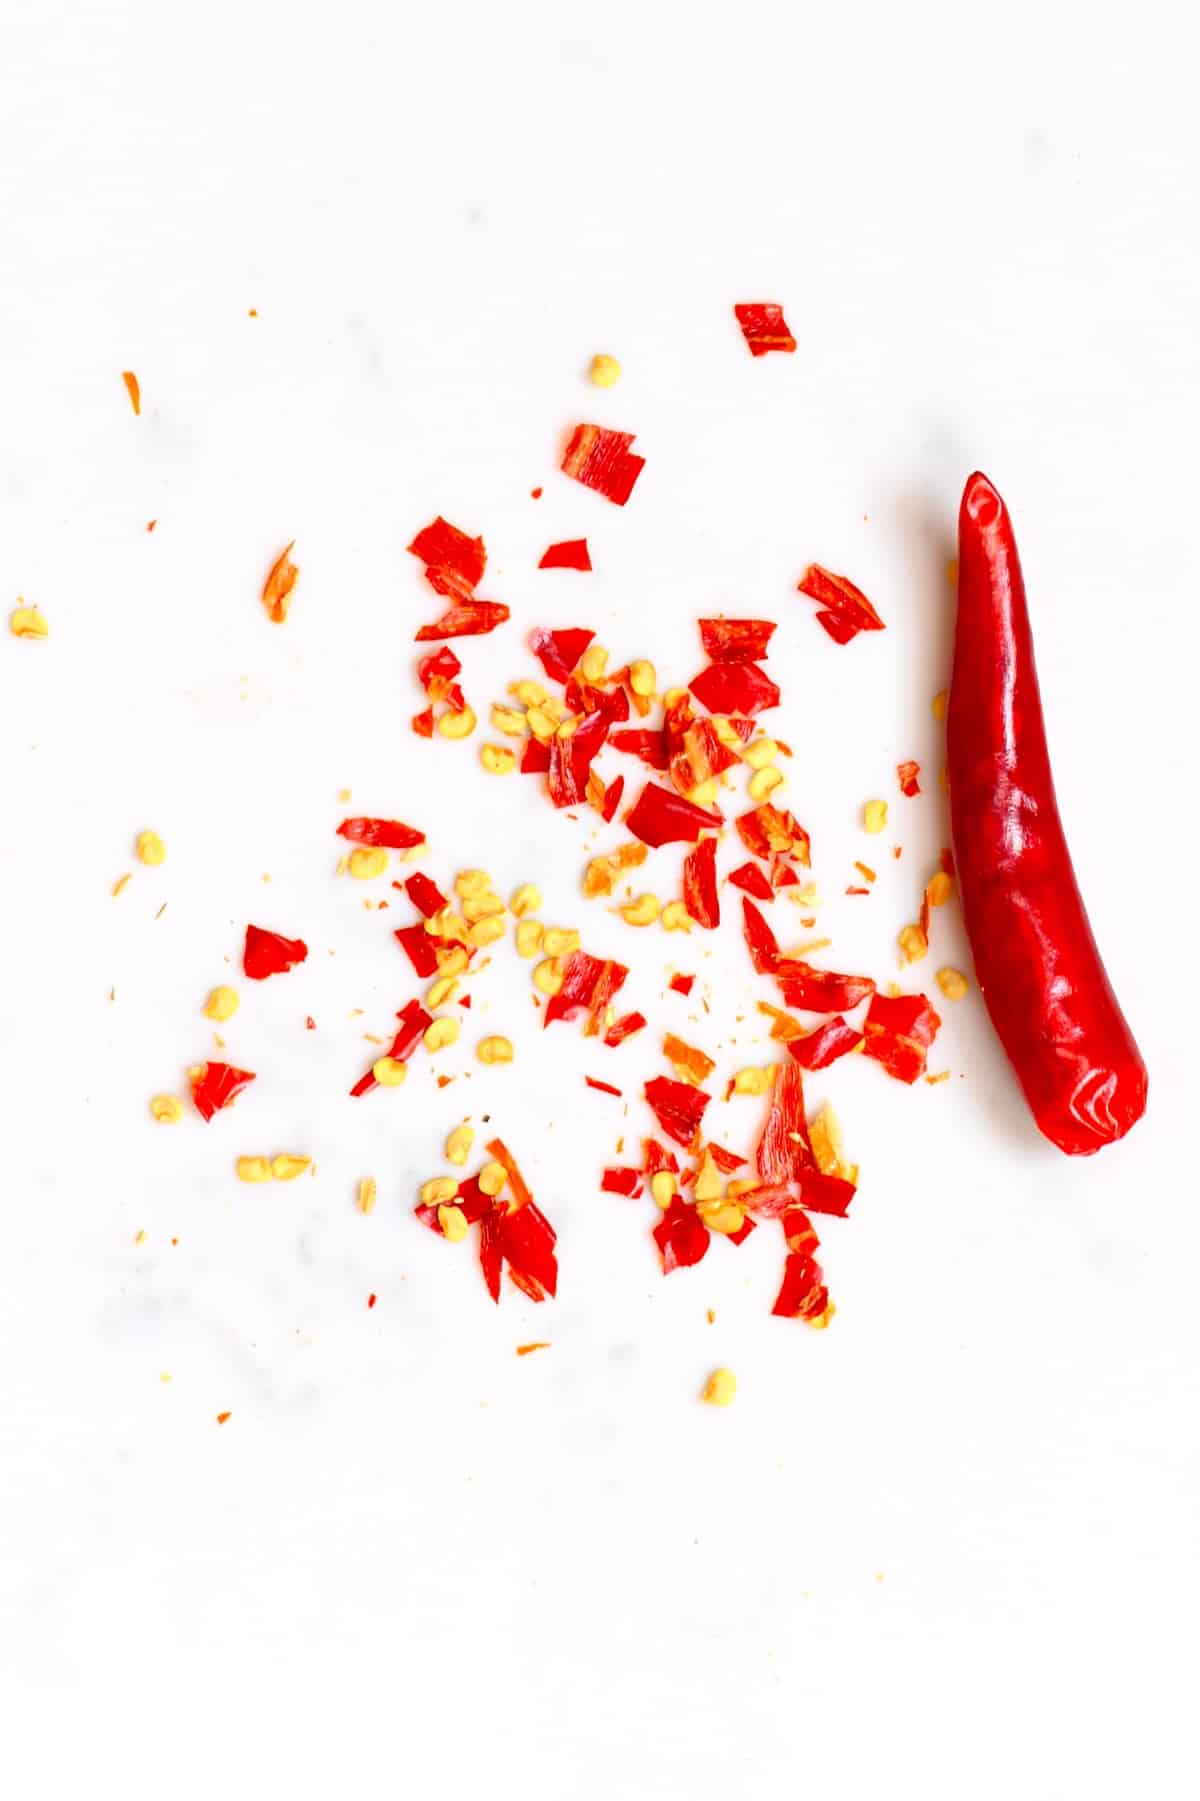 Chili flakes and one red chili